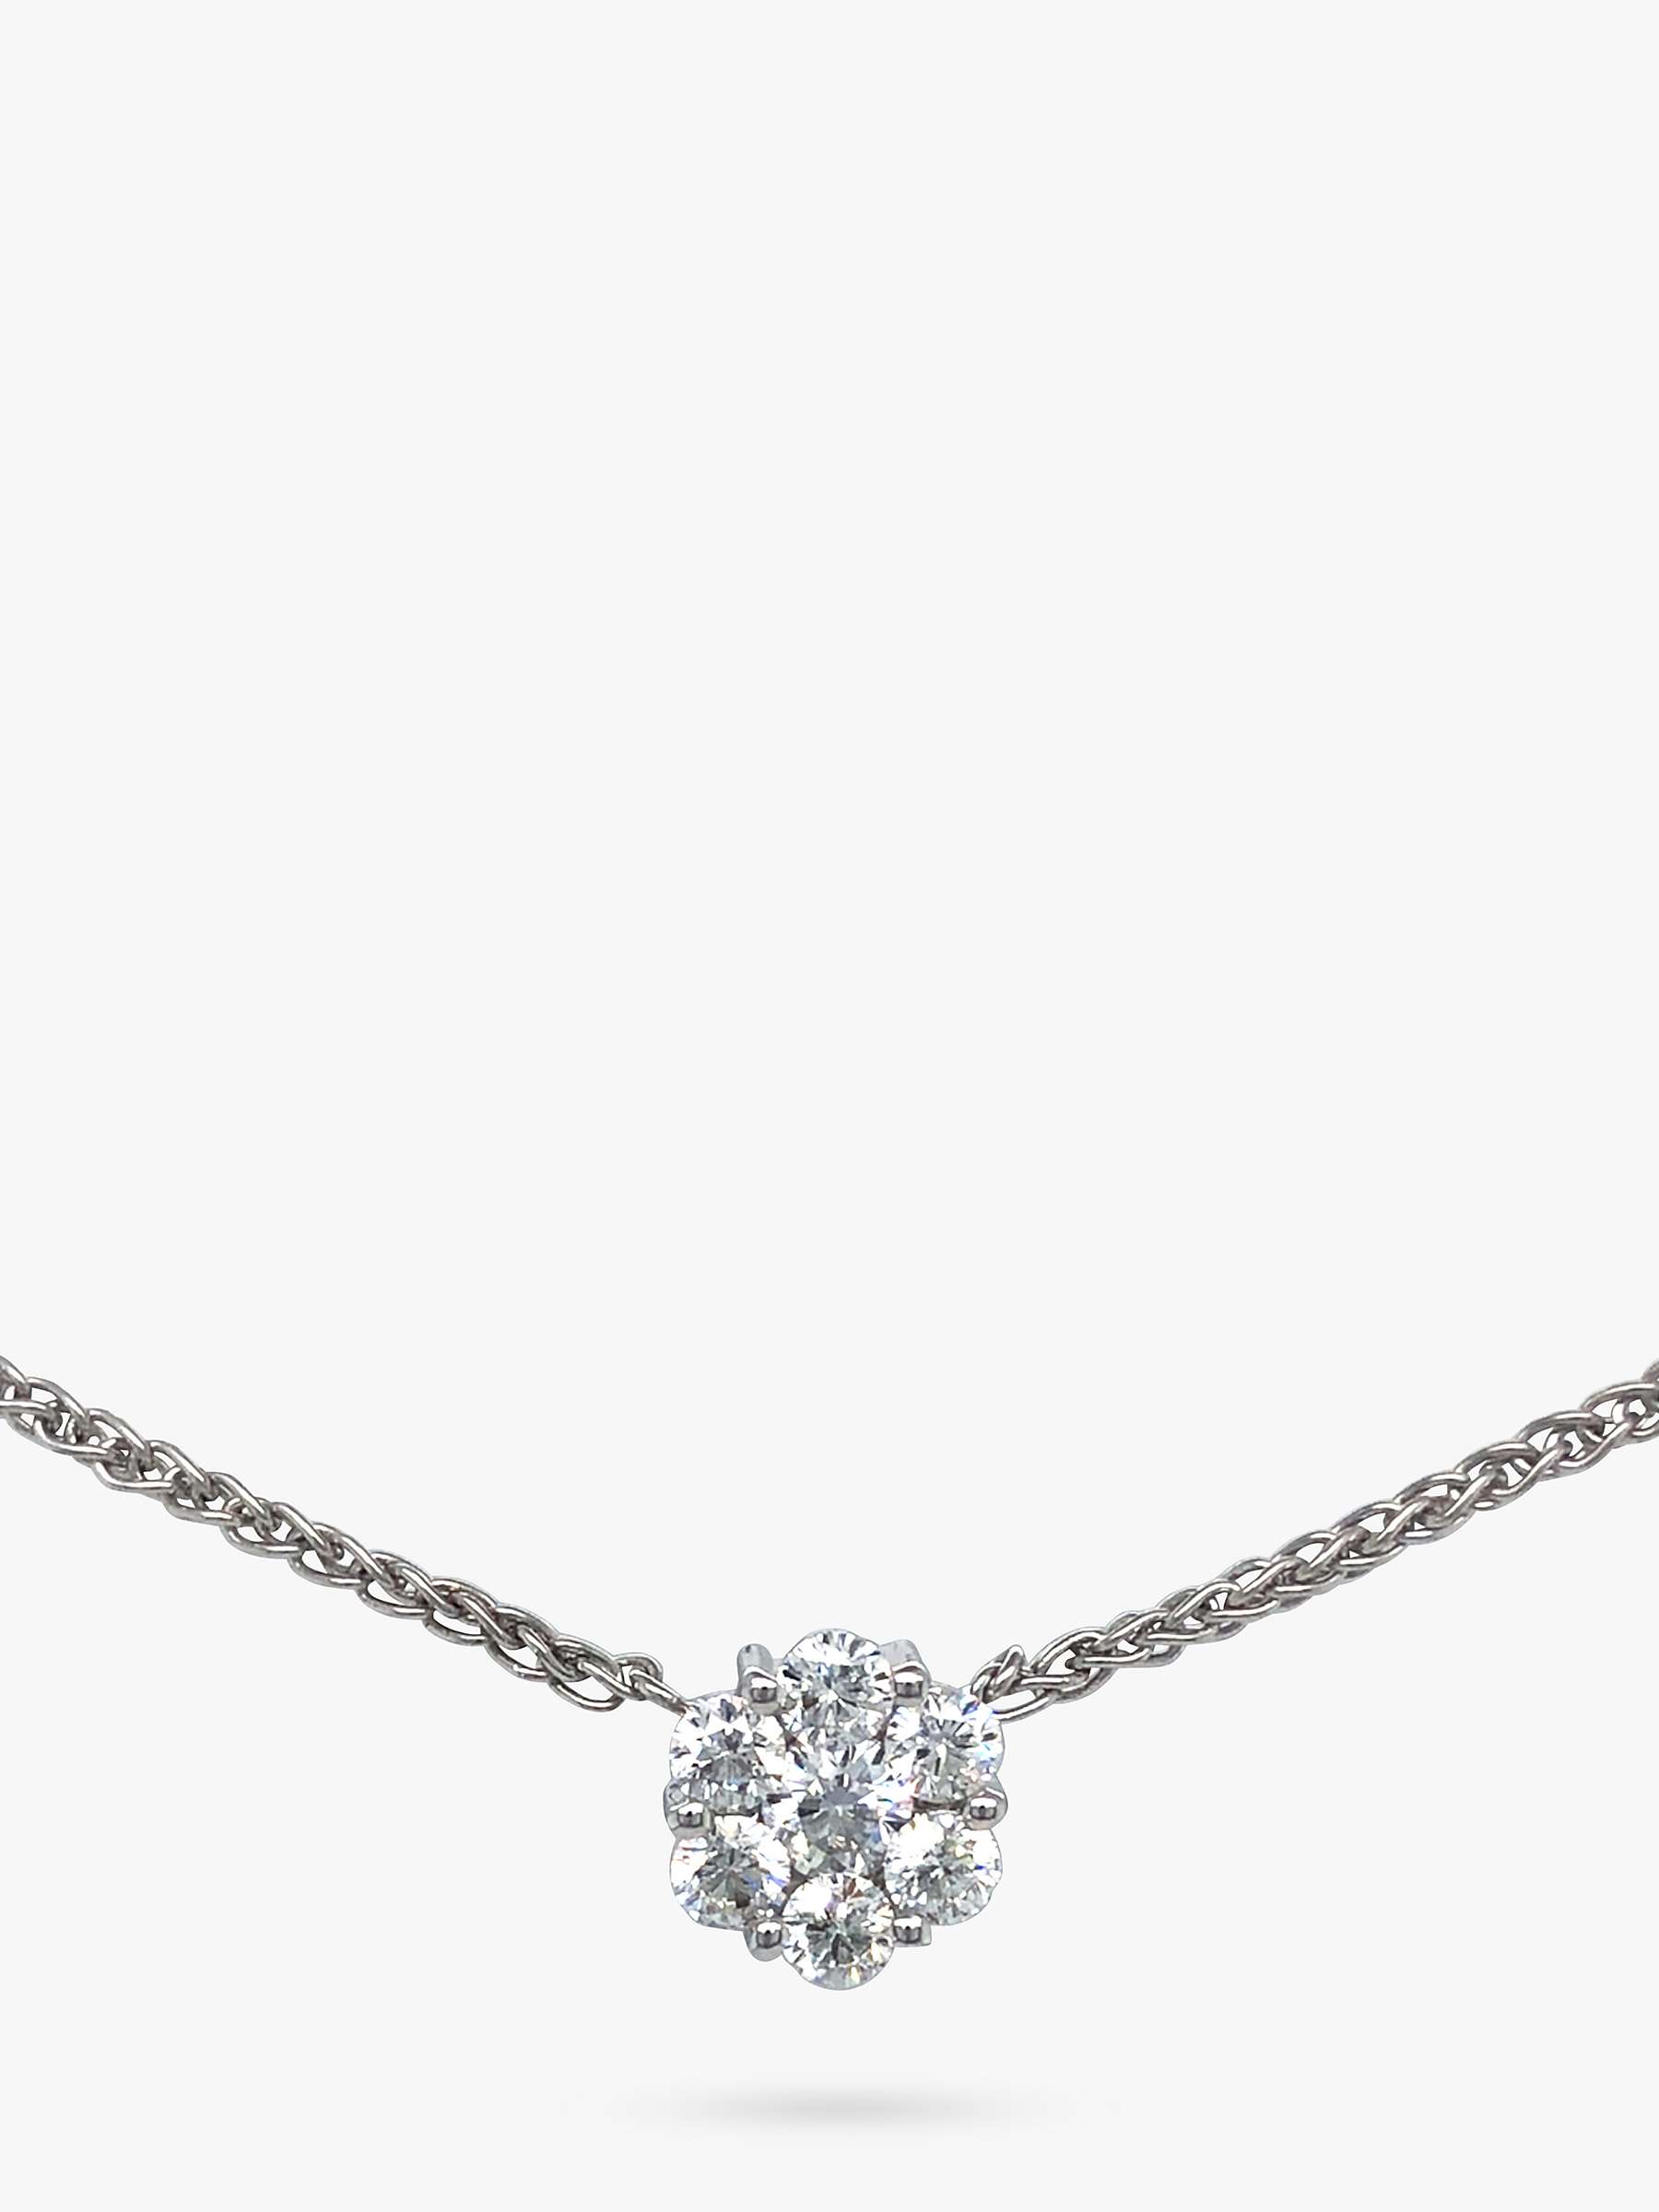 Buy Vintage Fine Jewellery Second Hand 14ct White Gold Diamond Cluster Pendant Necklace Online at johnlewis.com